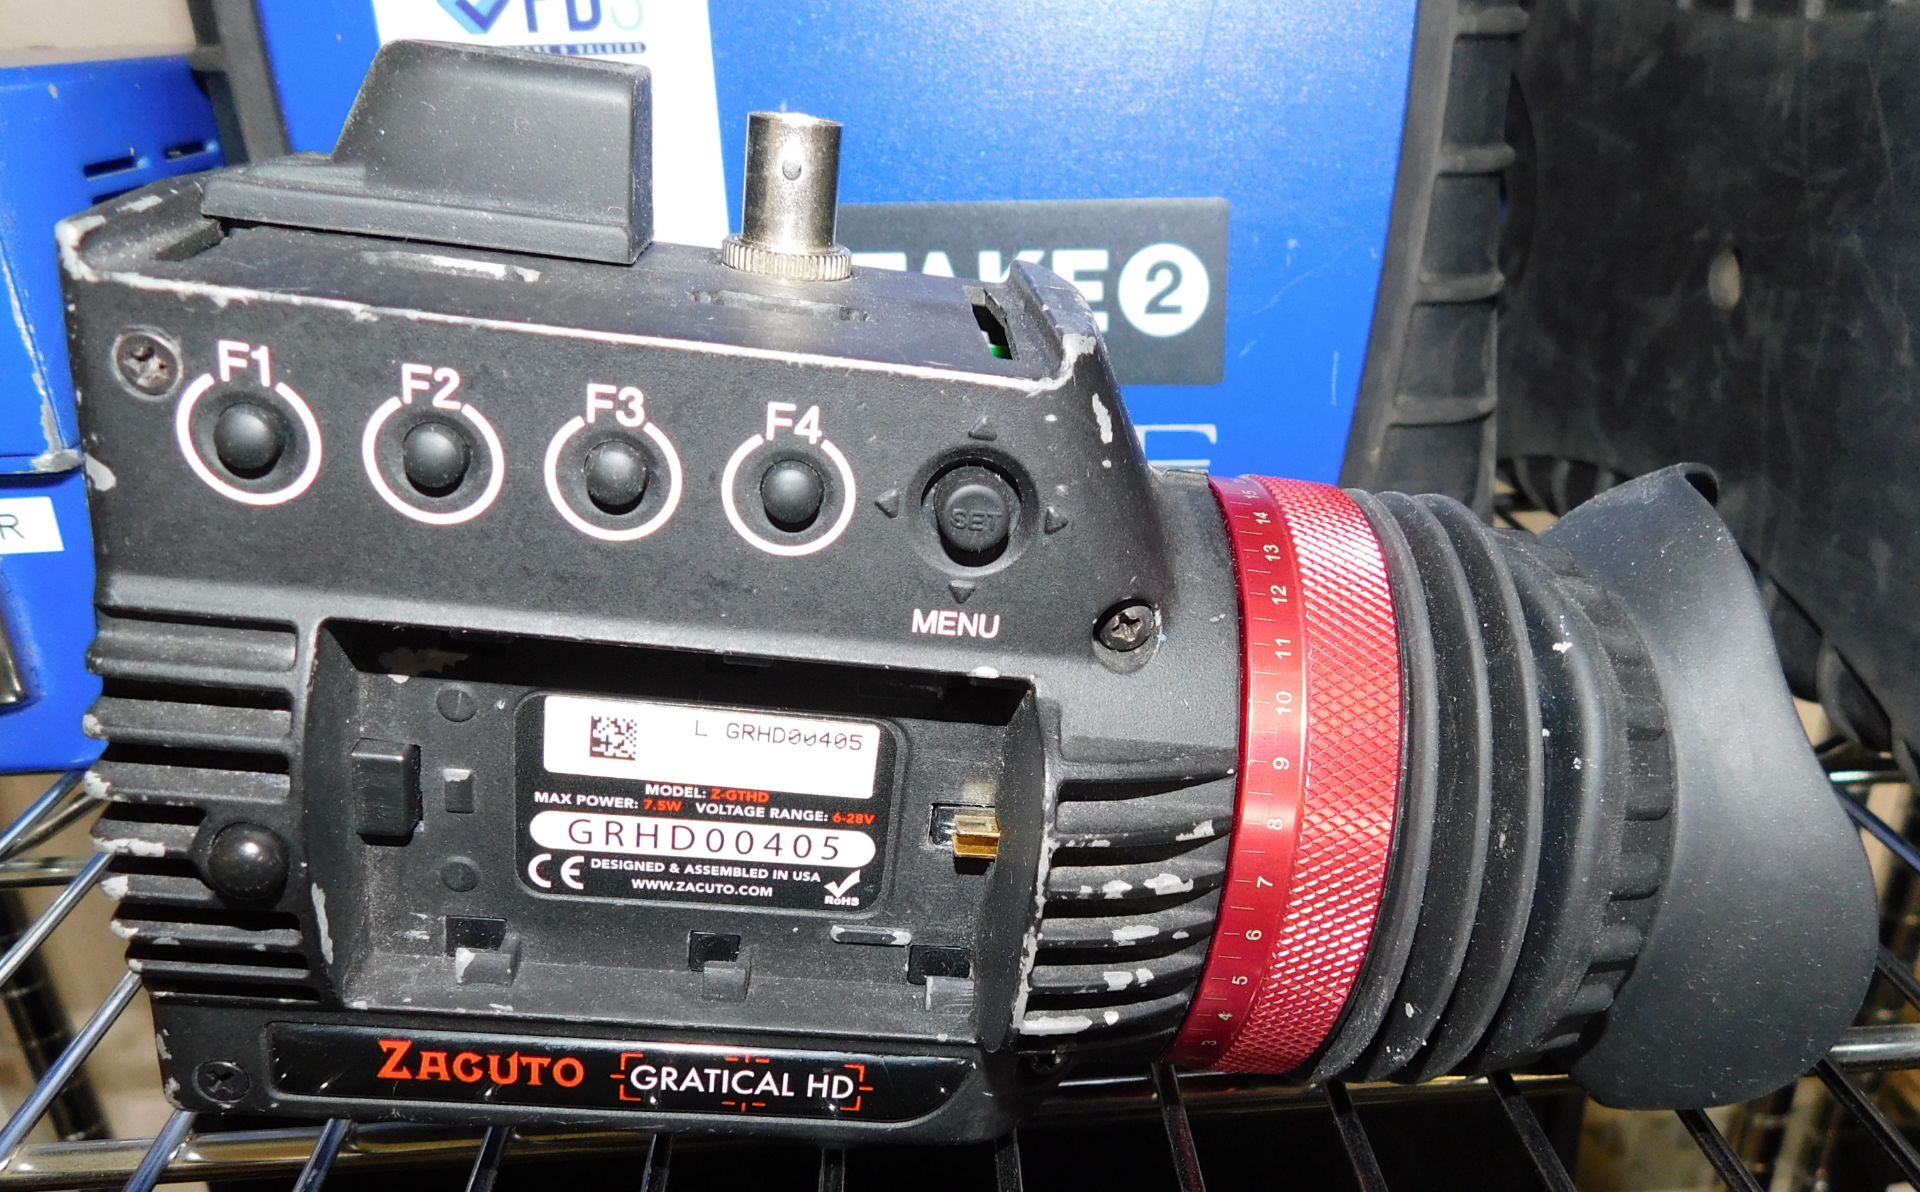 3 Anton Bauer Cine VCLX, 4 Dual Battery Chargers, 2 Charger Outputs & a Camera Lens Body (Location - Image 6 of 8